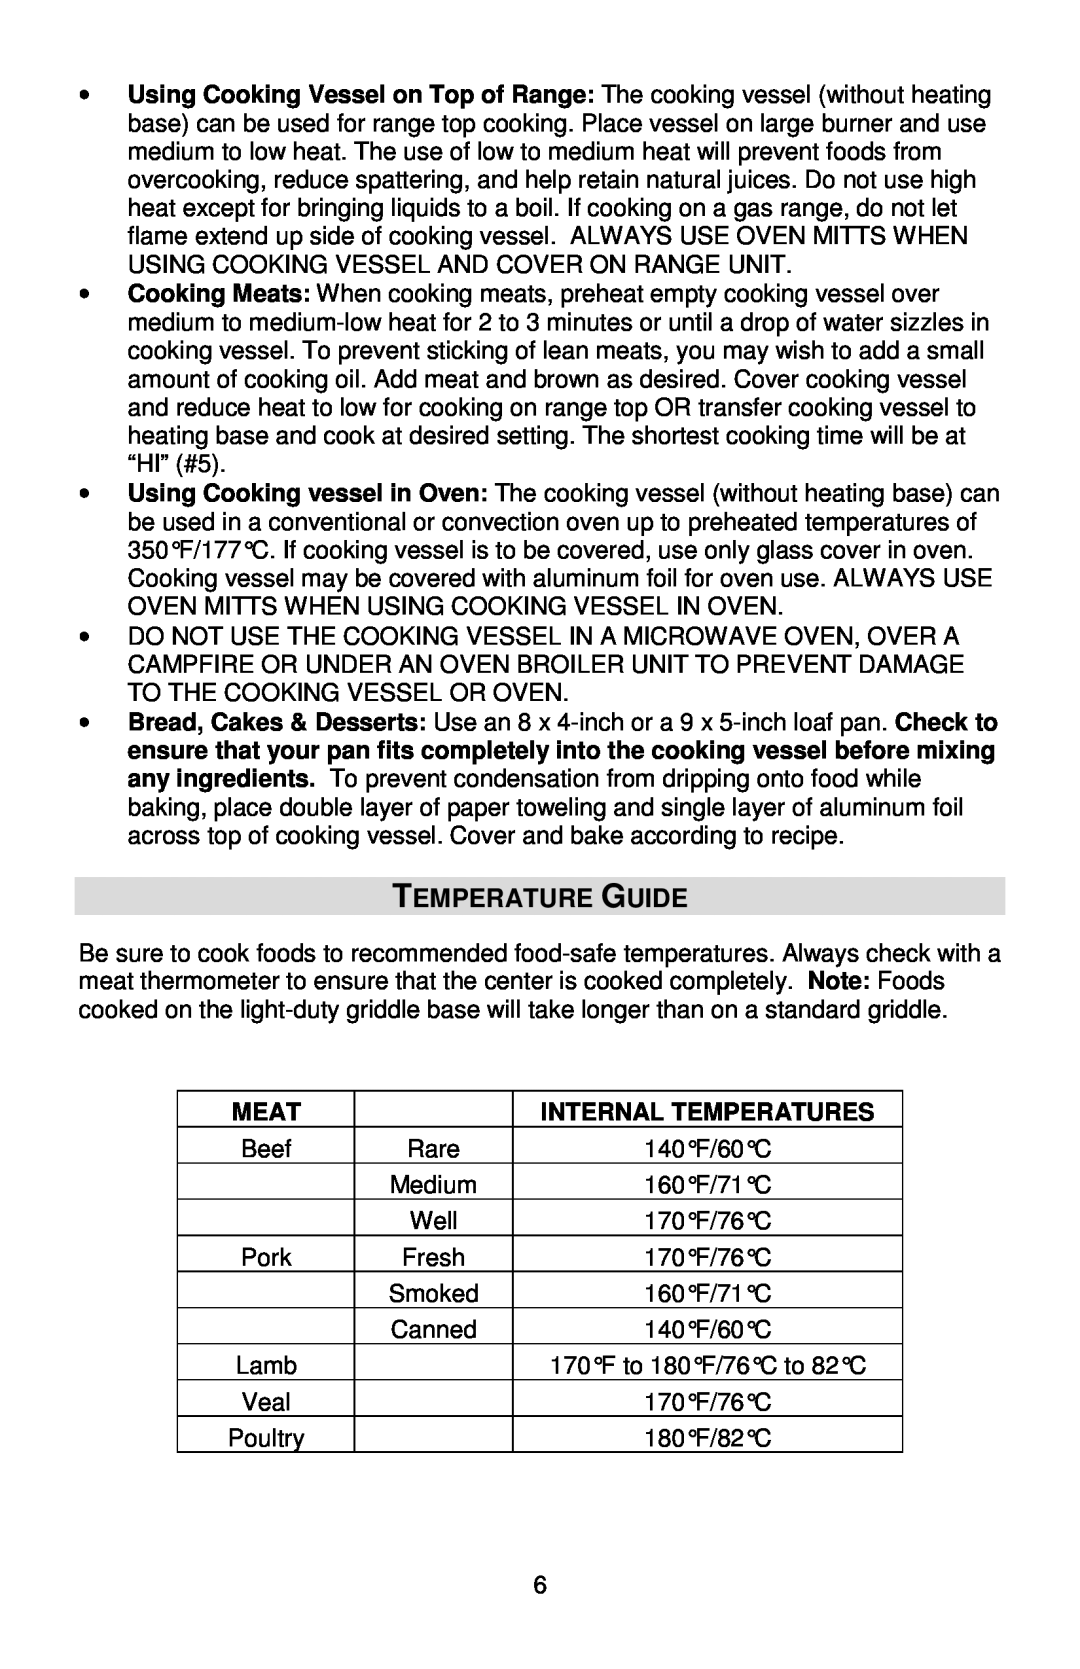 West Bend 84915 instruction manual Temperature Guide, Meat, Internal Temperatures 